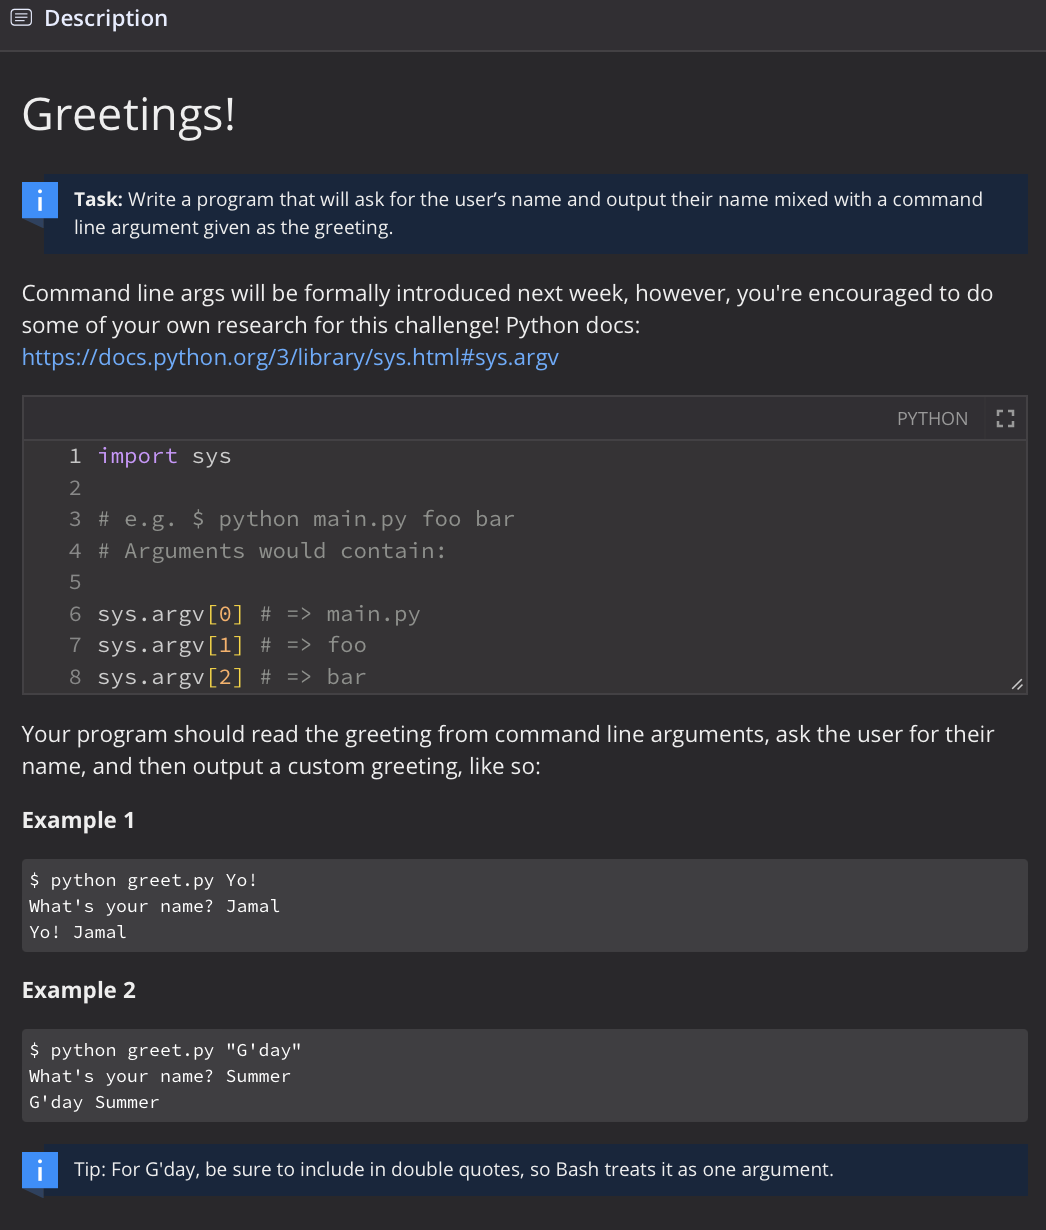 Description
Greetings!
Task: Write a program that will ask for the user's name and output their name mixed with a command
line argument given as the greeting.
Command line args will be formally introduced next week, however, you're encouraged to do
some of your own research for this challenge! Python docs:
https://docs.python.org/3/library/sys.html#sys.argv
PYTHON
1 import sys
2
3 # e.g. $ python main.py foo bar
4 # Arguments would contain:
5
6 sys.argv[0] # => main.py
7 sys.argv[1] % => foo
8 sys.argv[2] # => bar
Your program should read the greeting from command line arguments, ask the user for their
name, and then output a custom greeting, like so:
Example 1
$ python greet.py Yo!
What's your name? Jamal
Yo! Jamal
Example 2
$ python greet.py "G'day"
What's your name? Summer
G'day Summer
Tip: For G'day, be sure to include in double quotes, so Bash treats it as one argument.